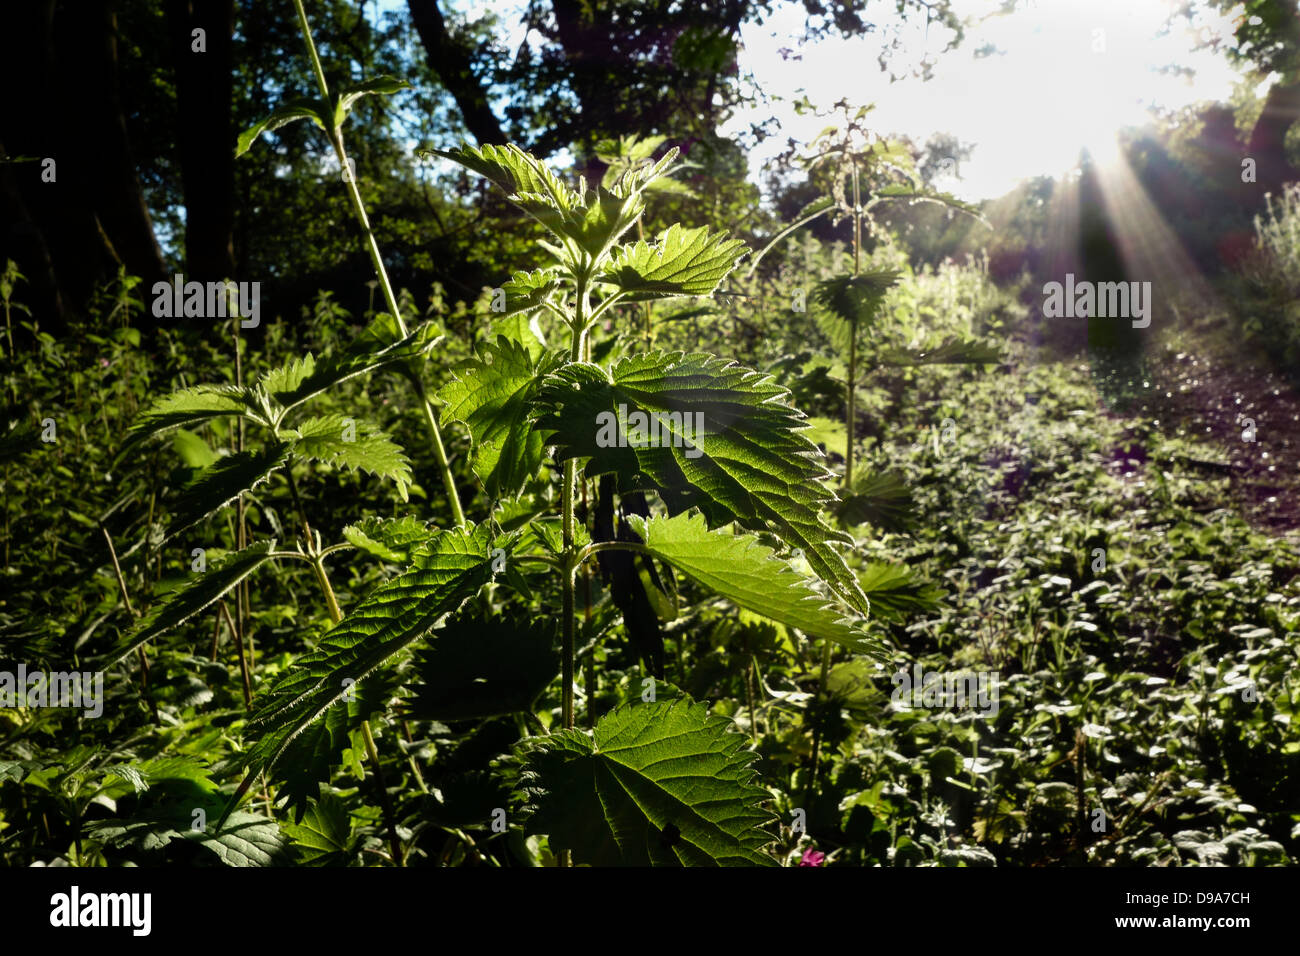 Stinging nettle Urtica dioica in wood Stock Photo